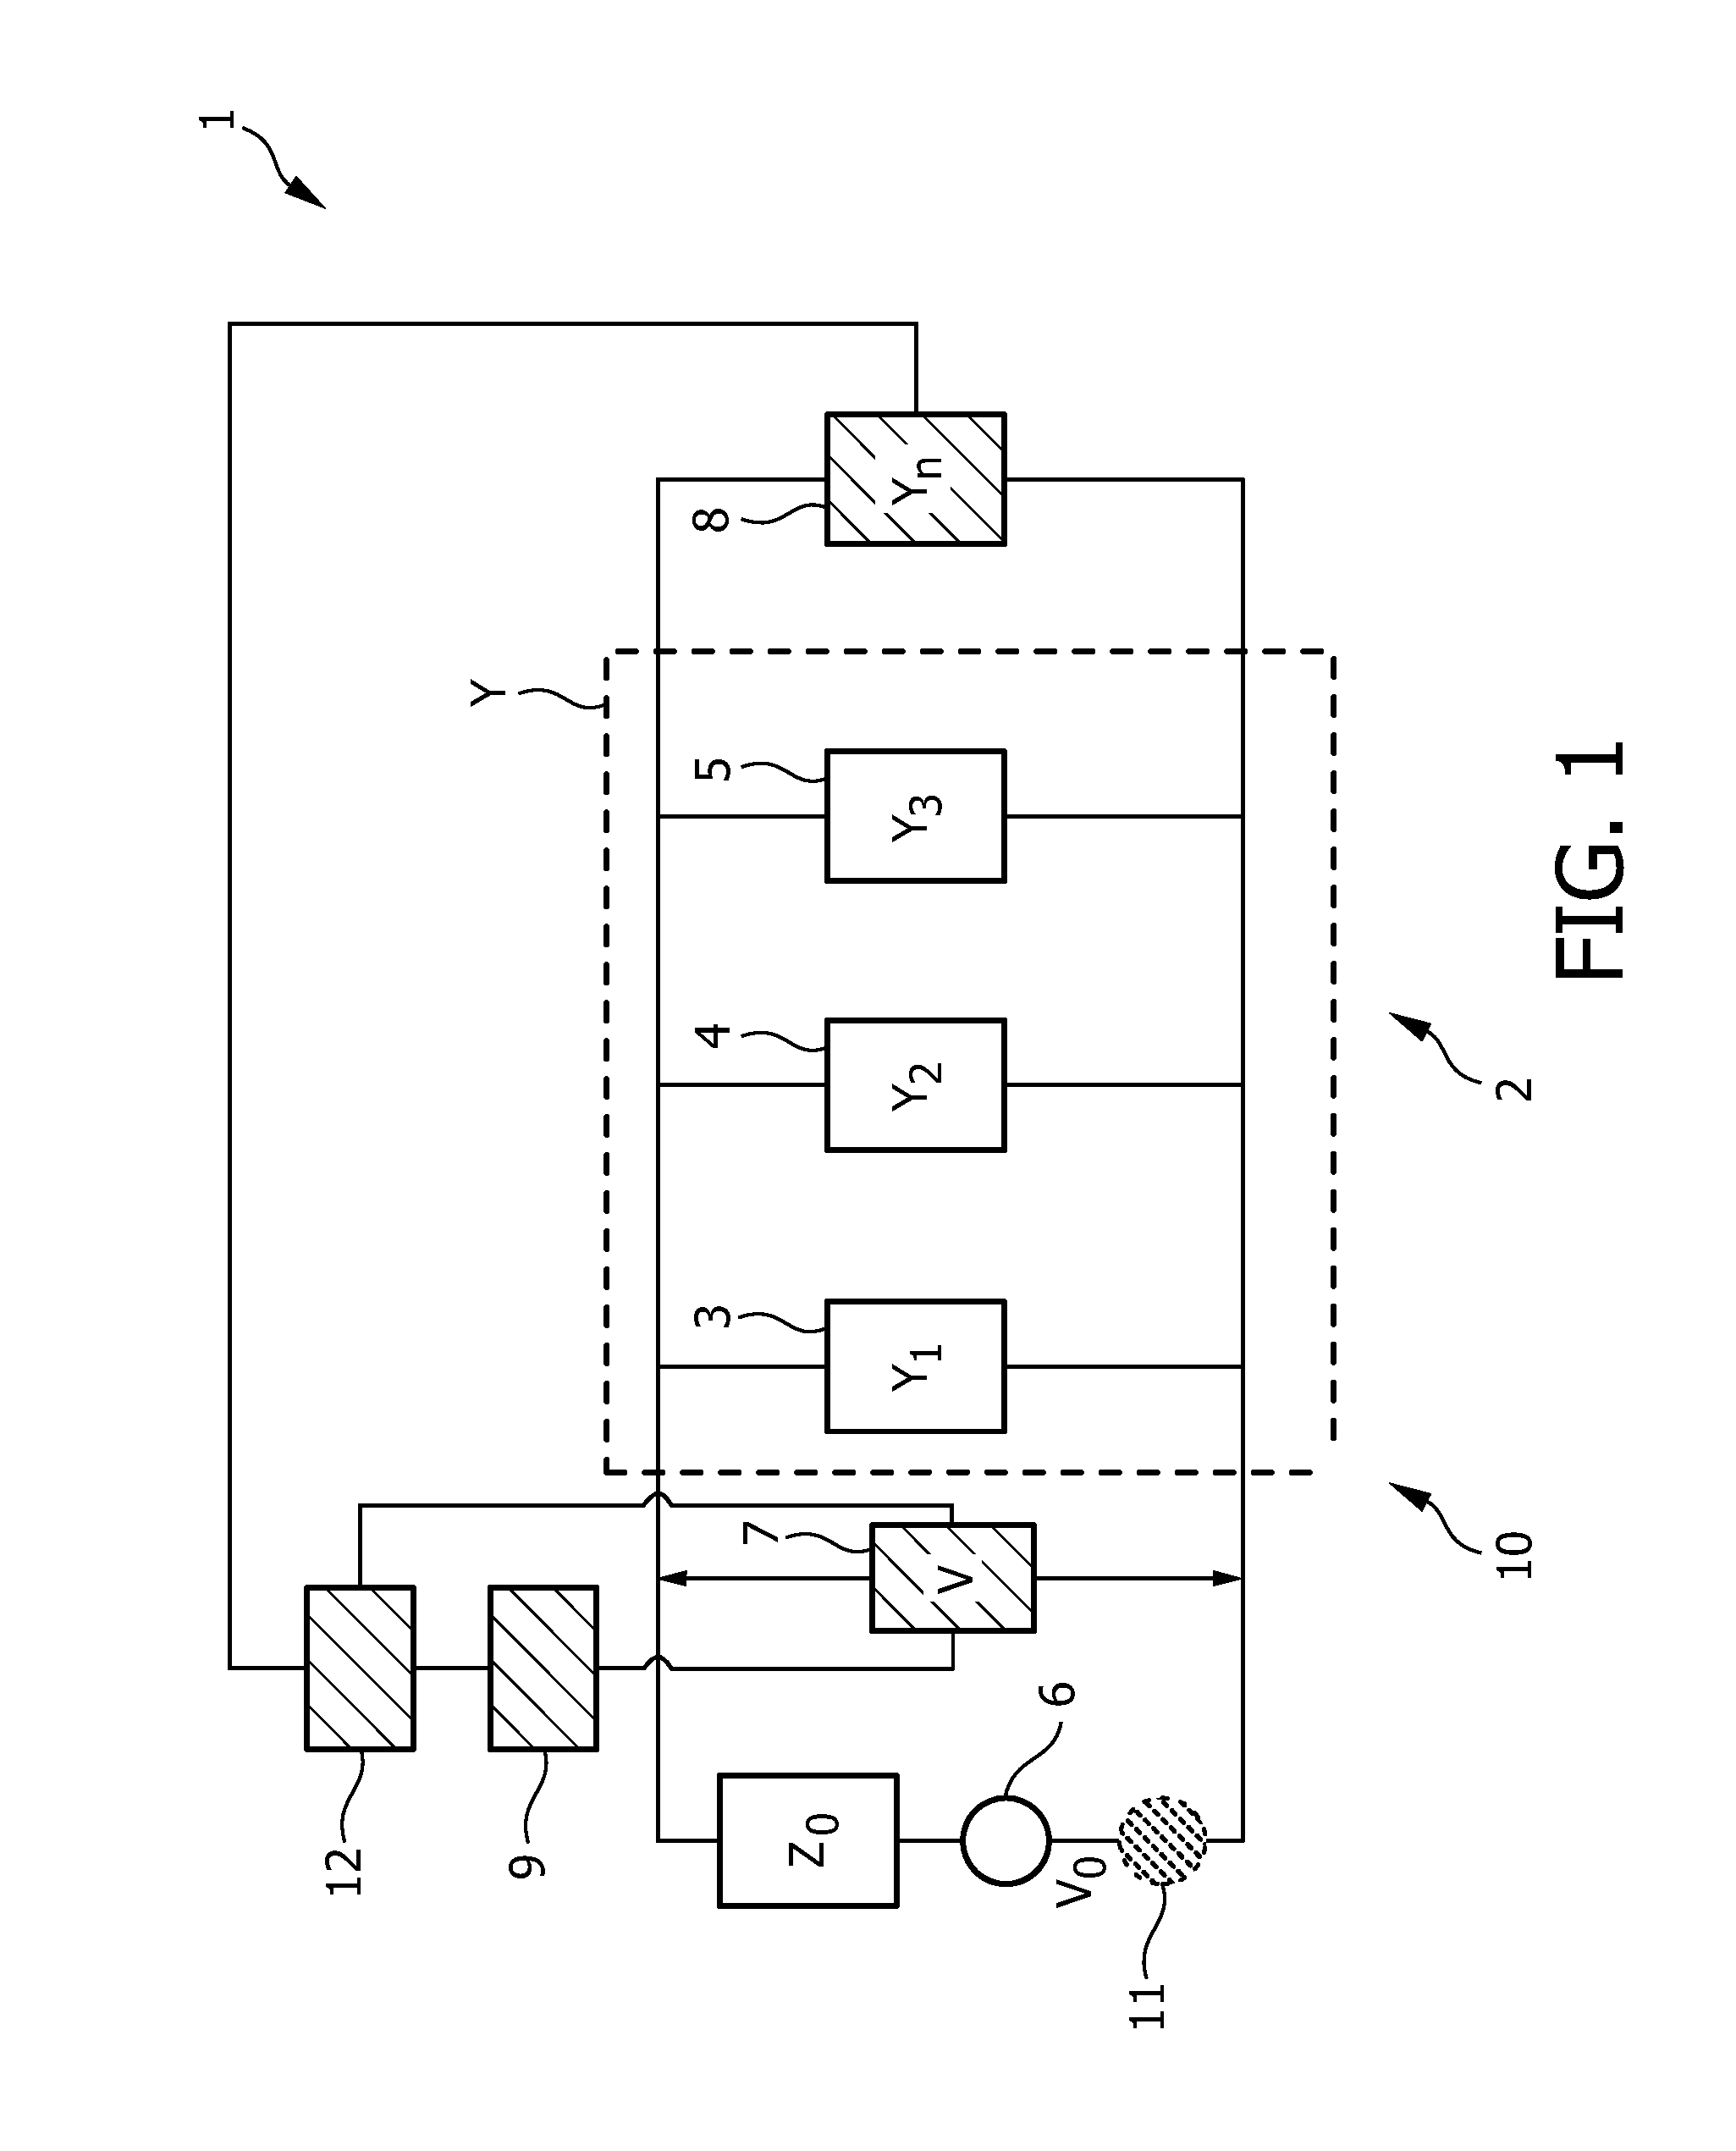 Disaggregation apparatus for identifying an appliance in an electrical network